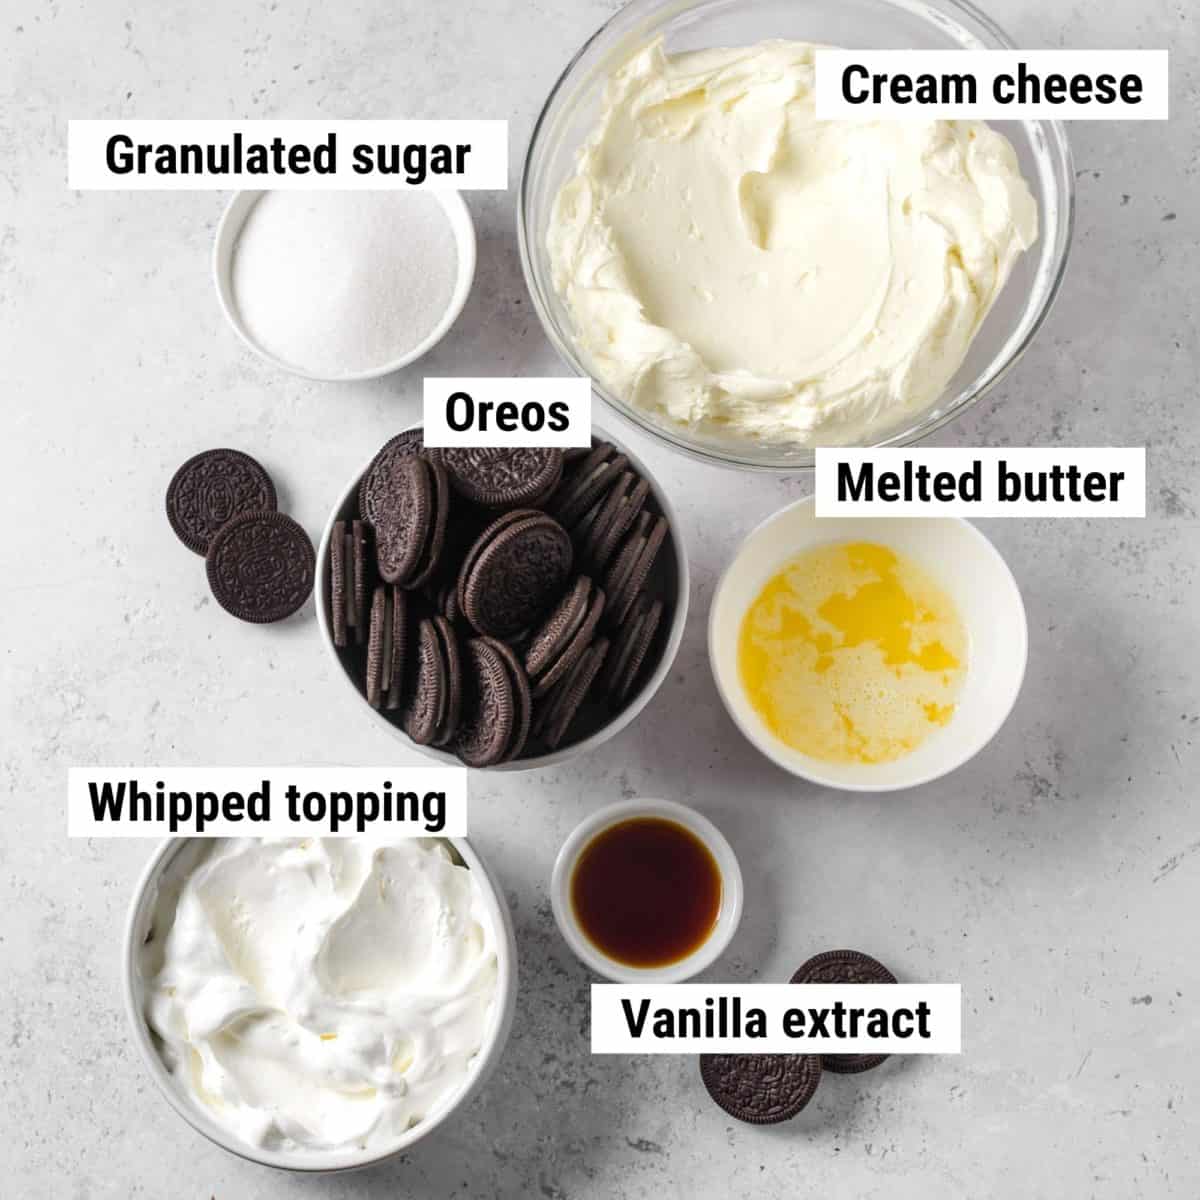 The ingredients used to make Philadelphia Oreo cheesecake spread out on a table.